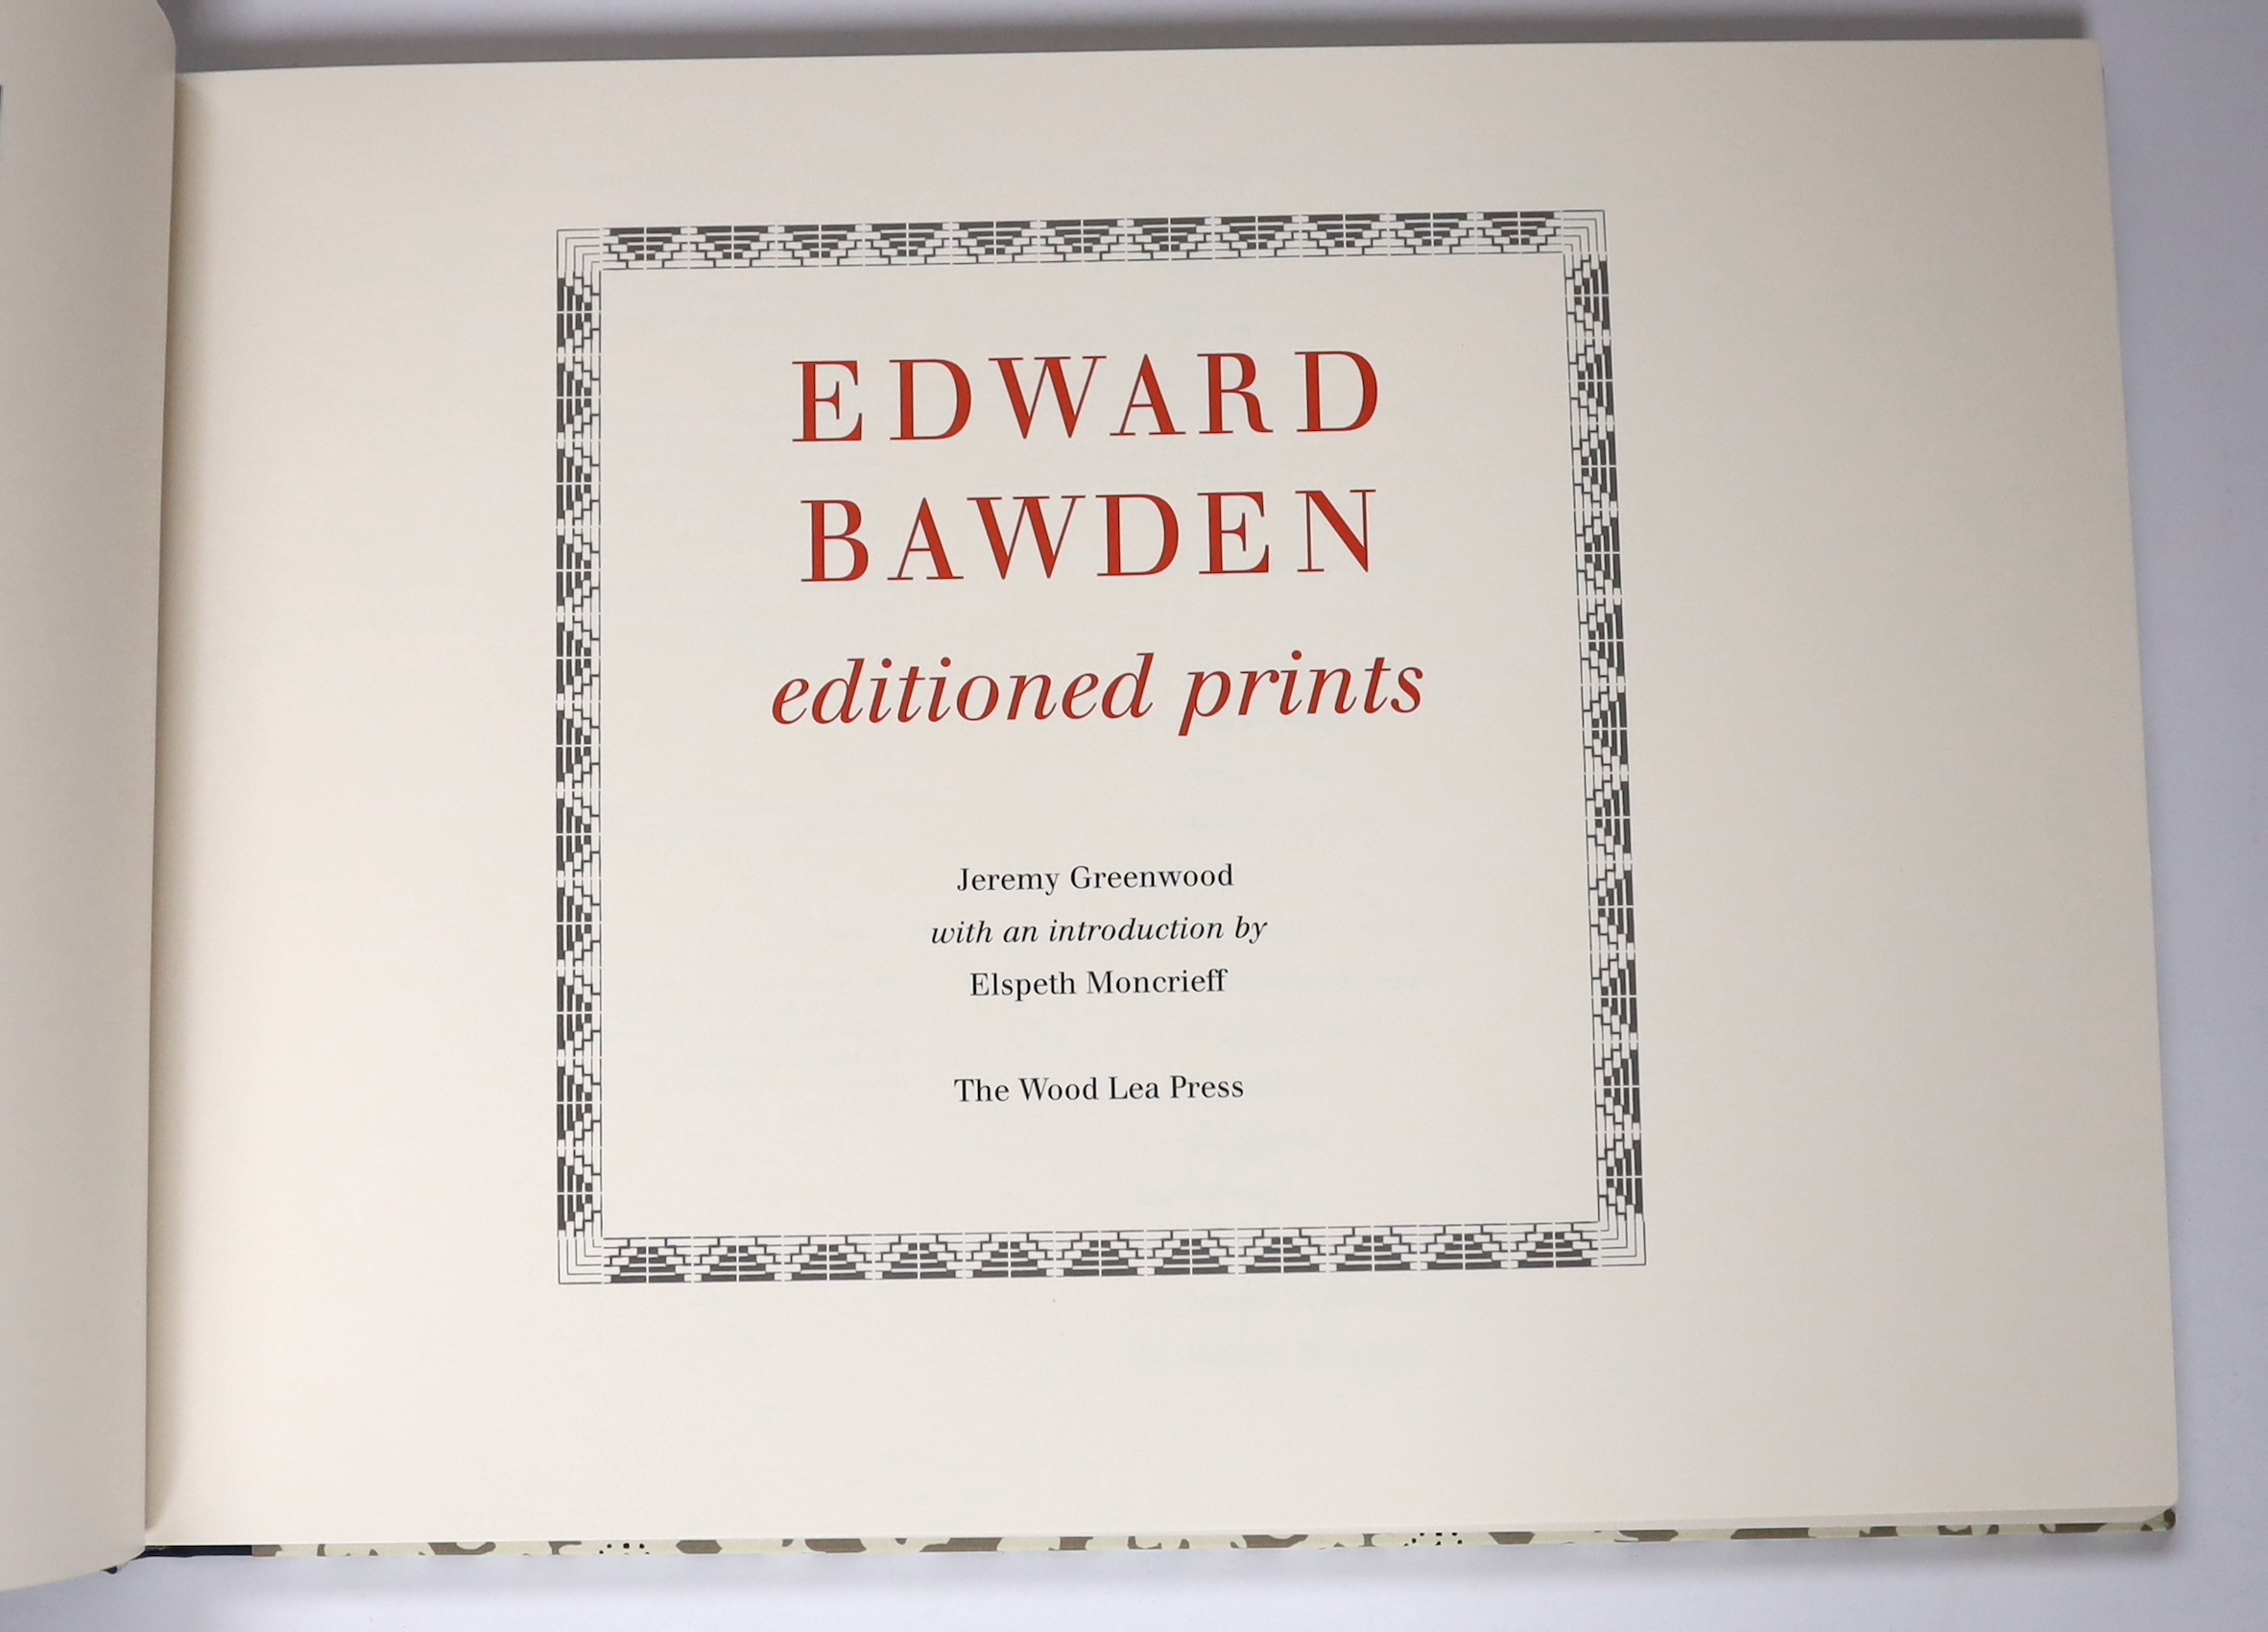 Greenwood, Jeremy - Edward Bawden: Editioned prints, one of 450, original cloth-backed patterned-paper boards, The Wood Lea Press, Woodbridge, 2005, in slip case.